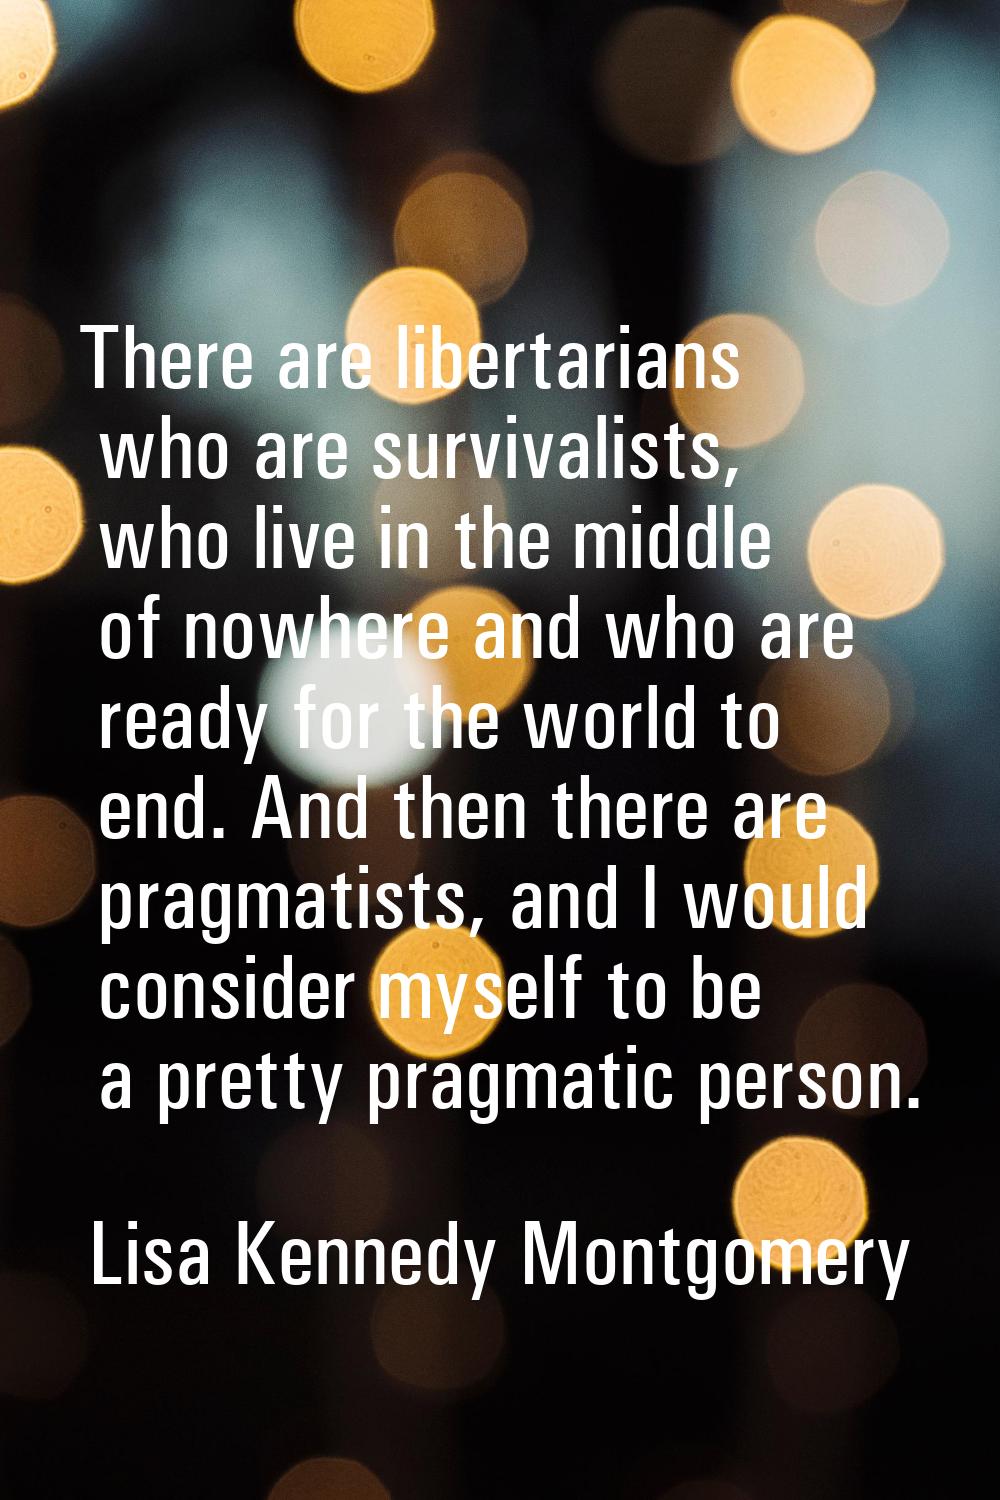 There are libertarians who are survivalists, who live in the middle of nowhere and who are ready fo